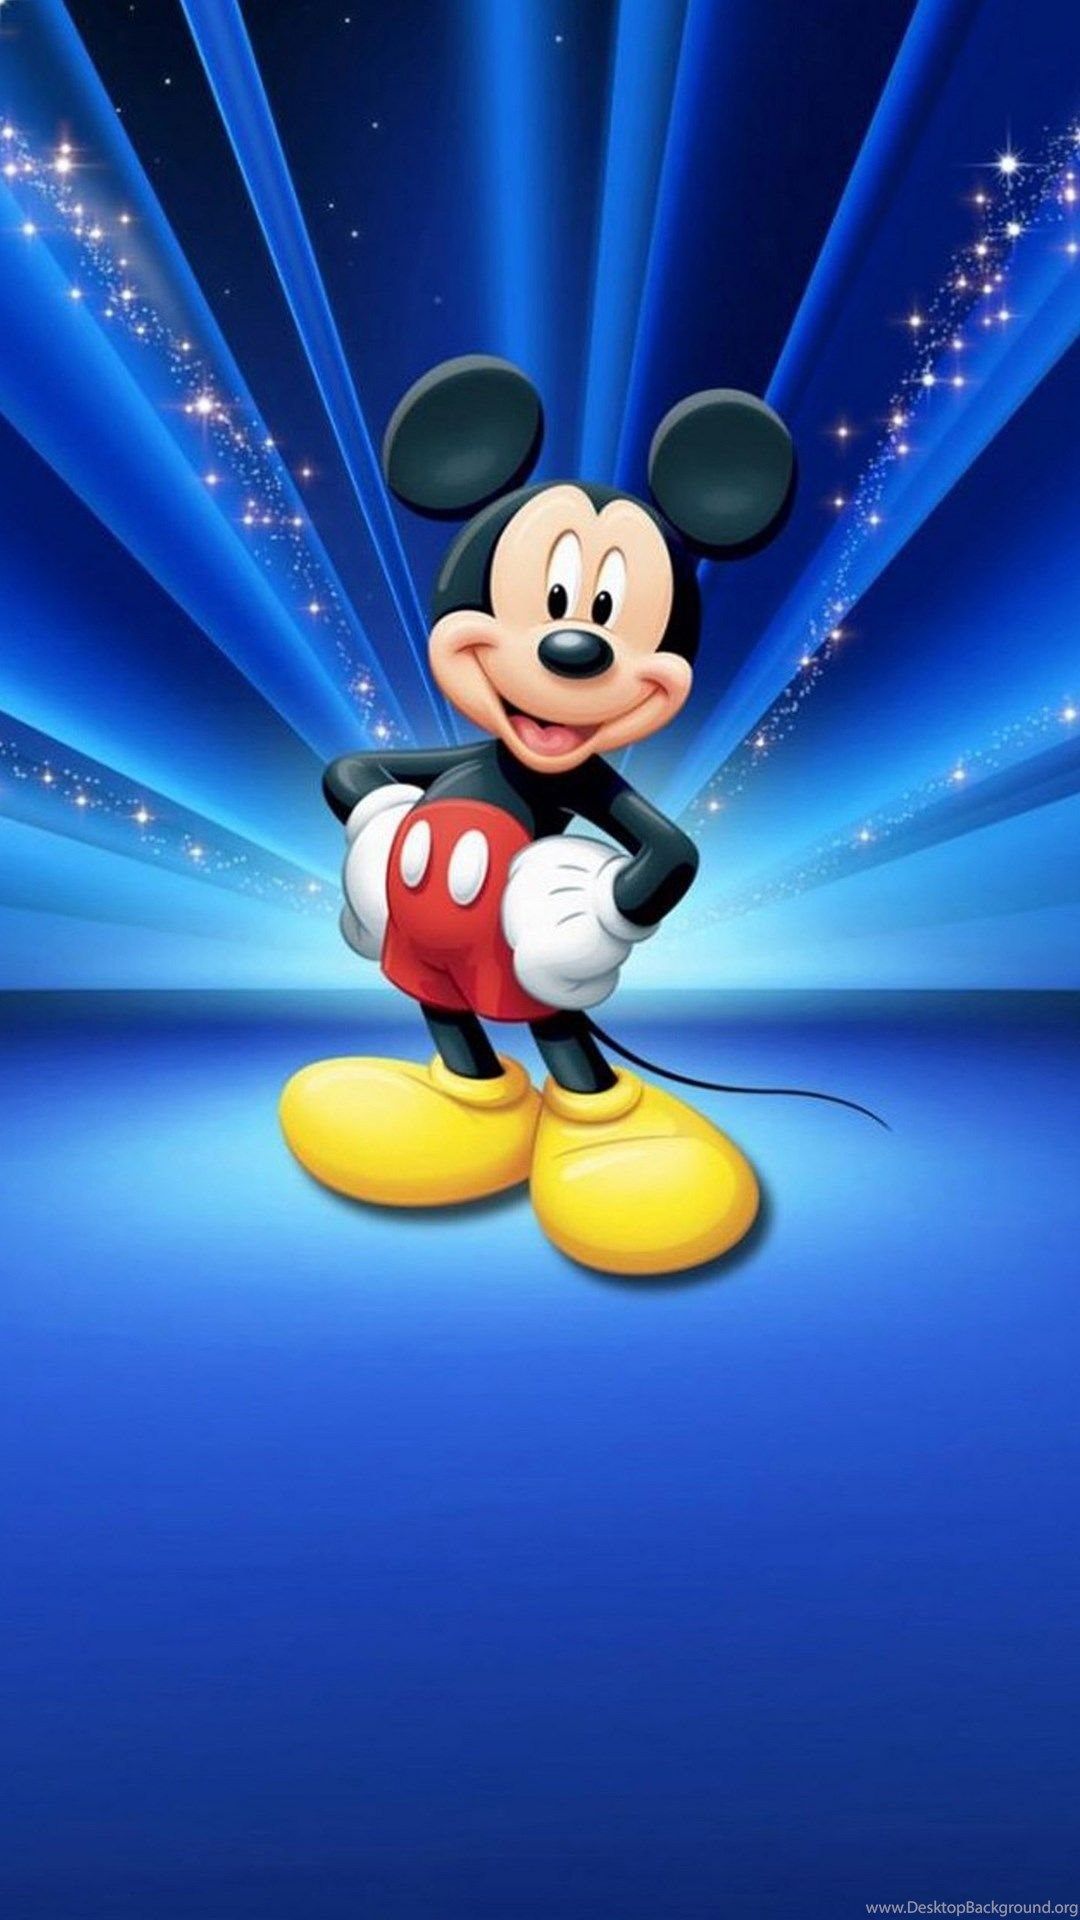 Samsung Galaxy A8 Wallpaper: Blue Mickey Mouse Android Wallpaper Desktop Background